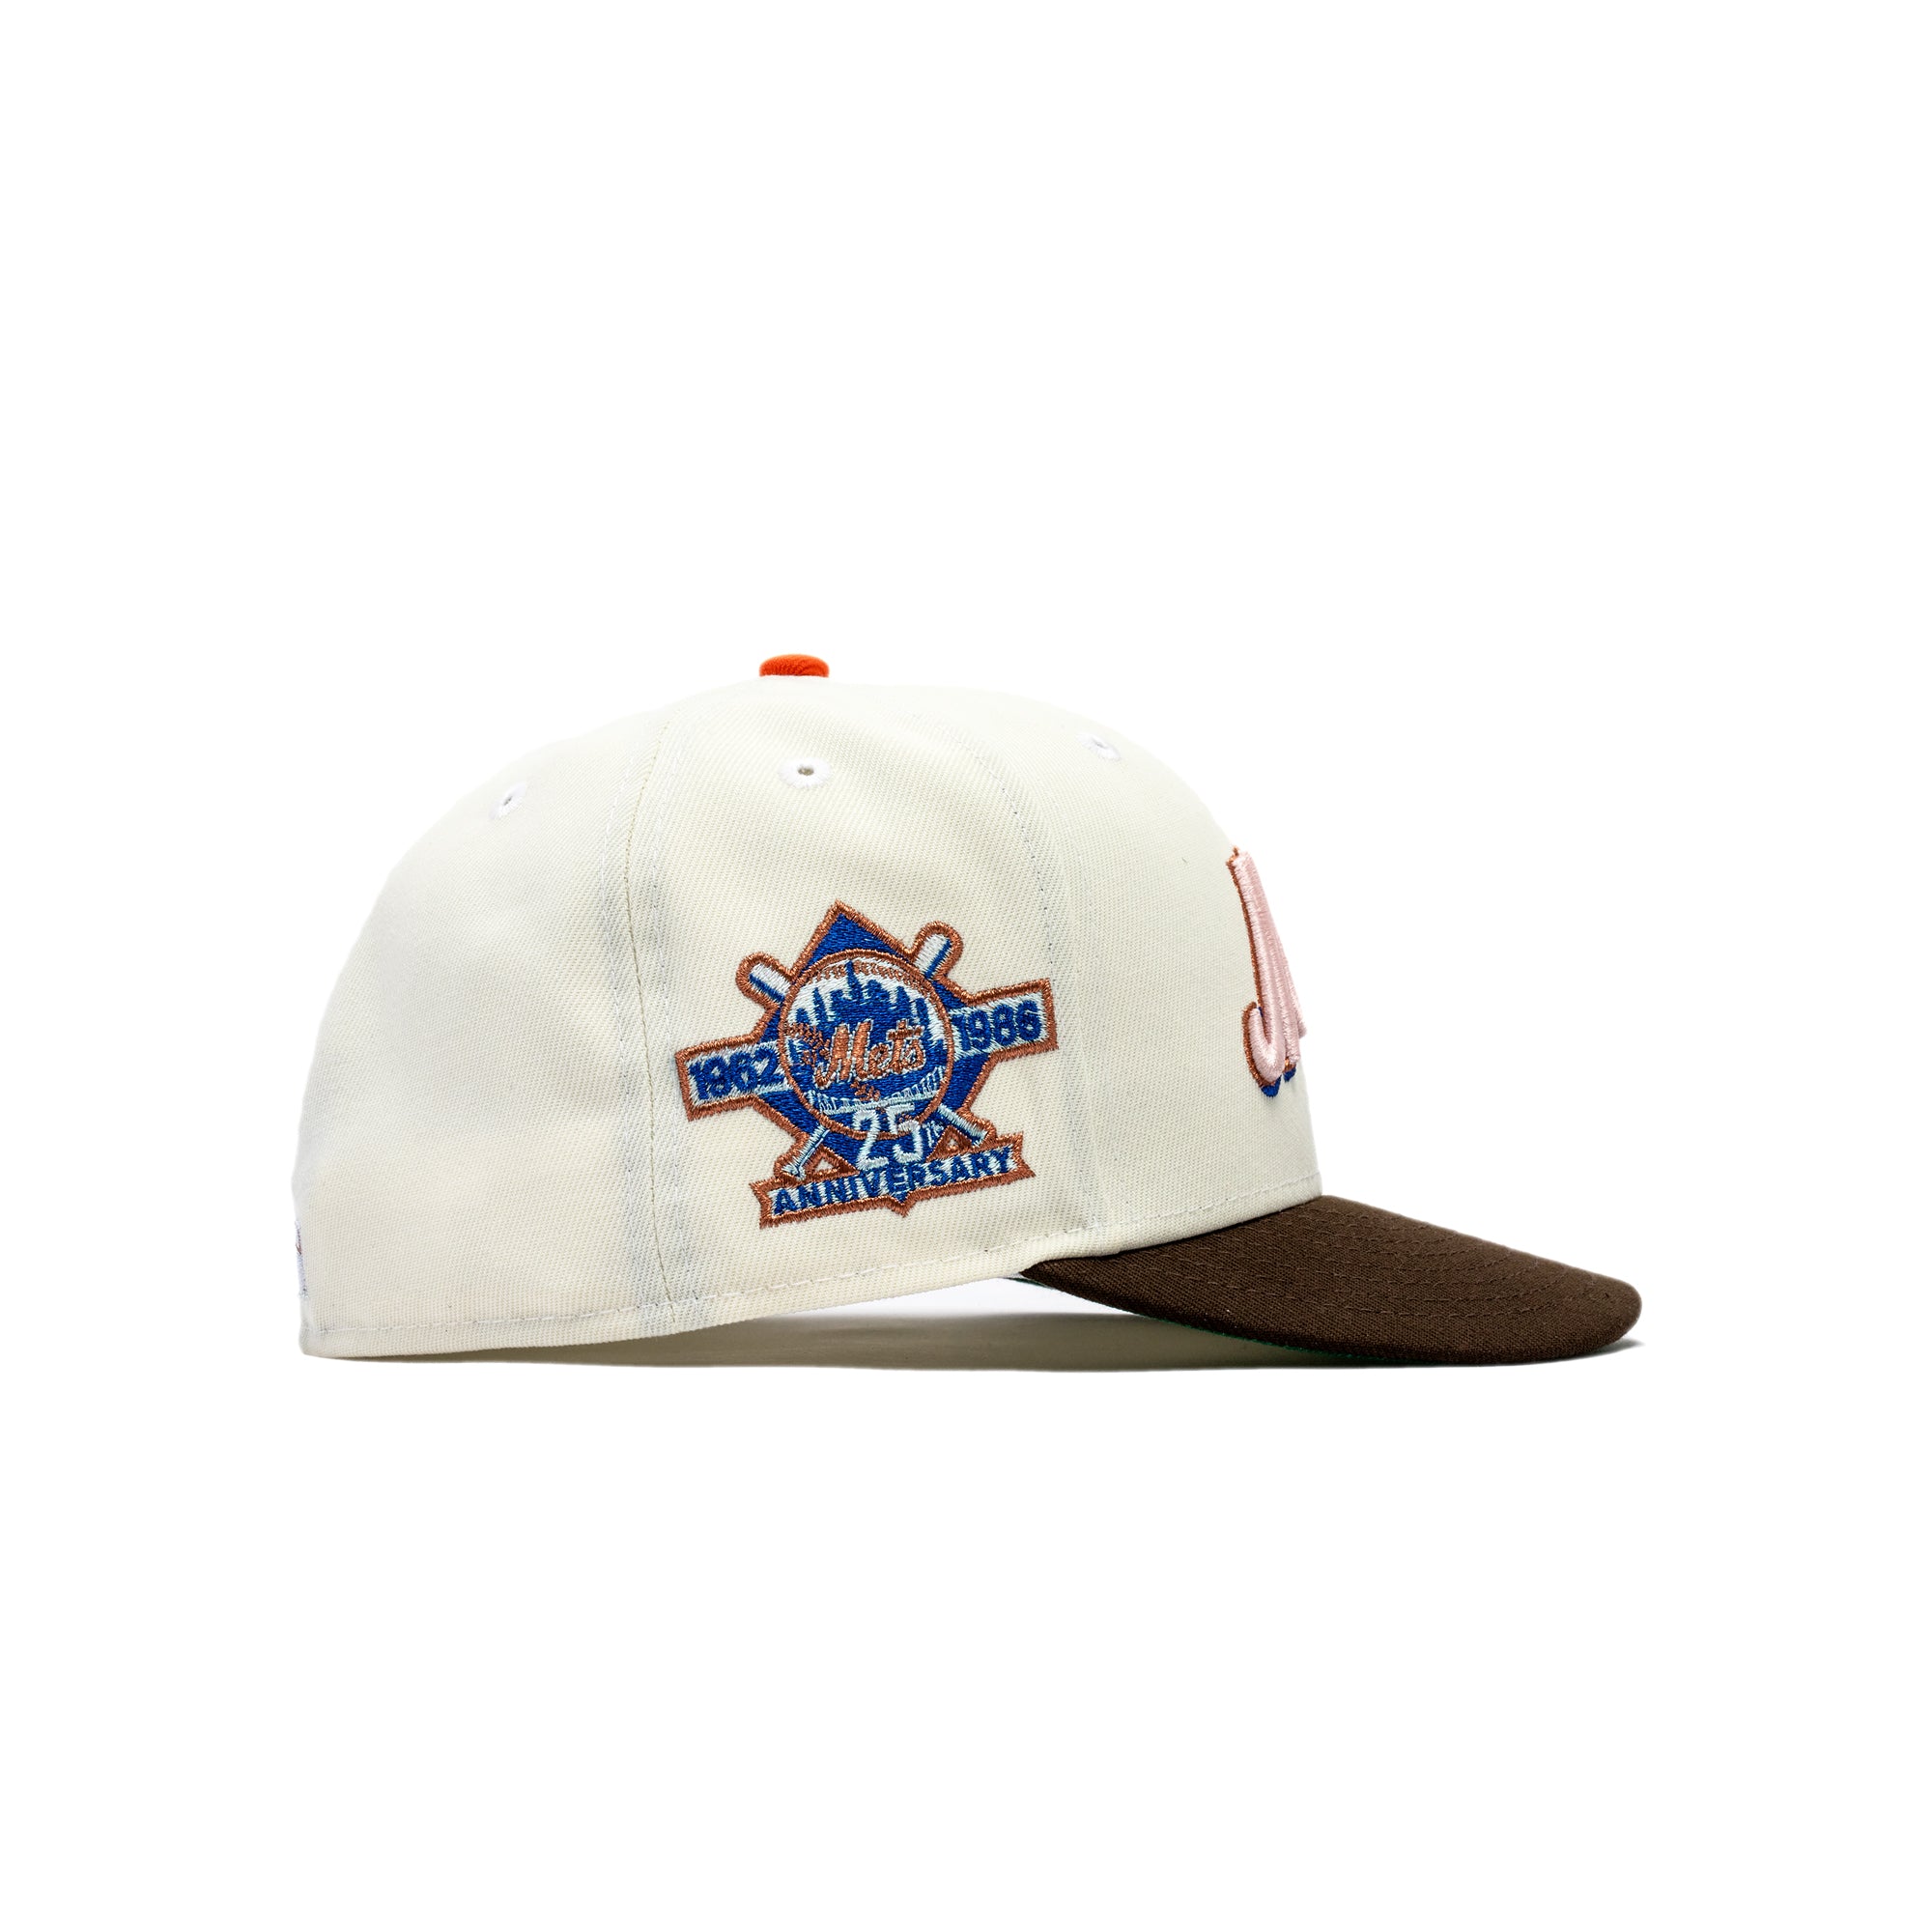 New Era 59Fifty Caps & Kegs Mets Chrome Fitted Hat